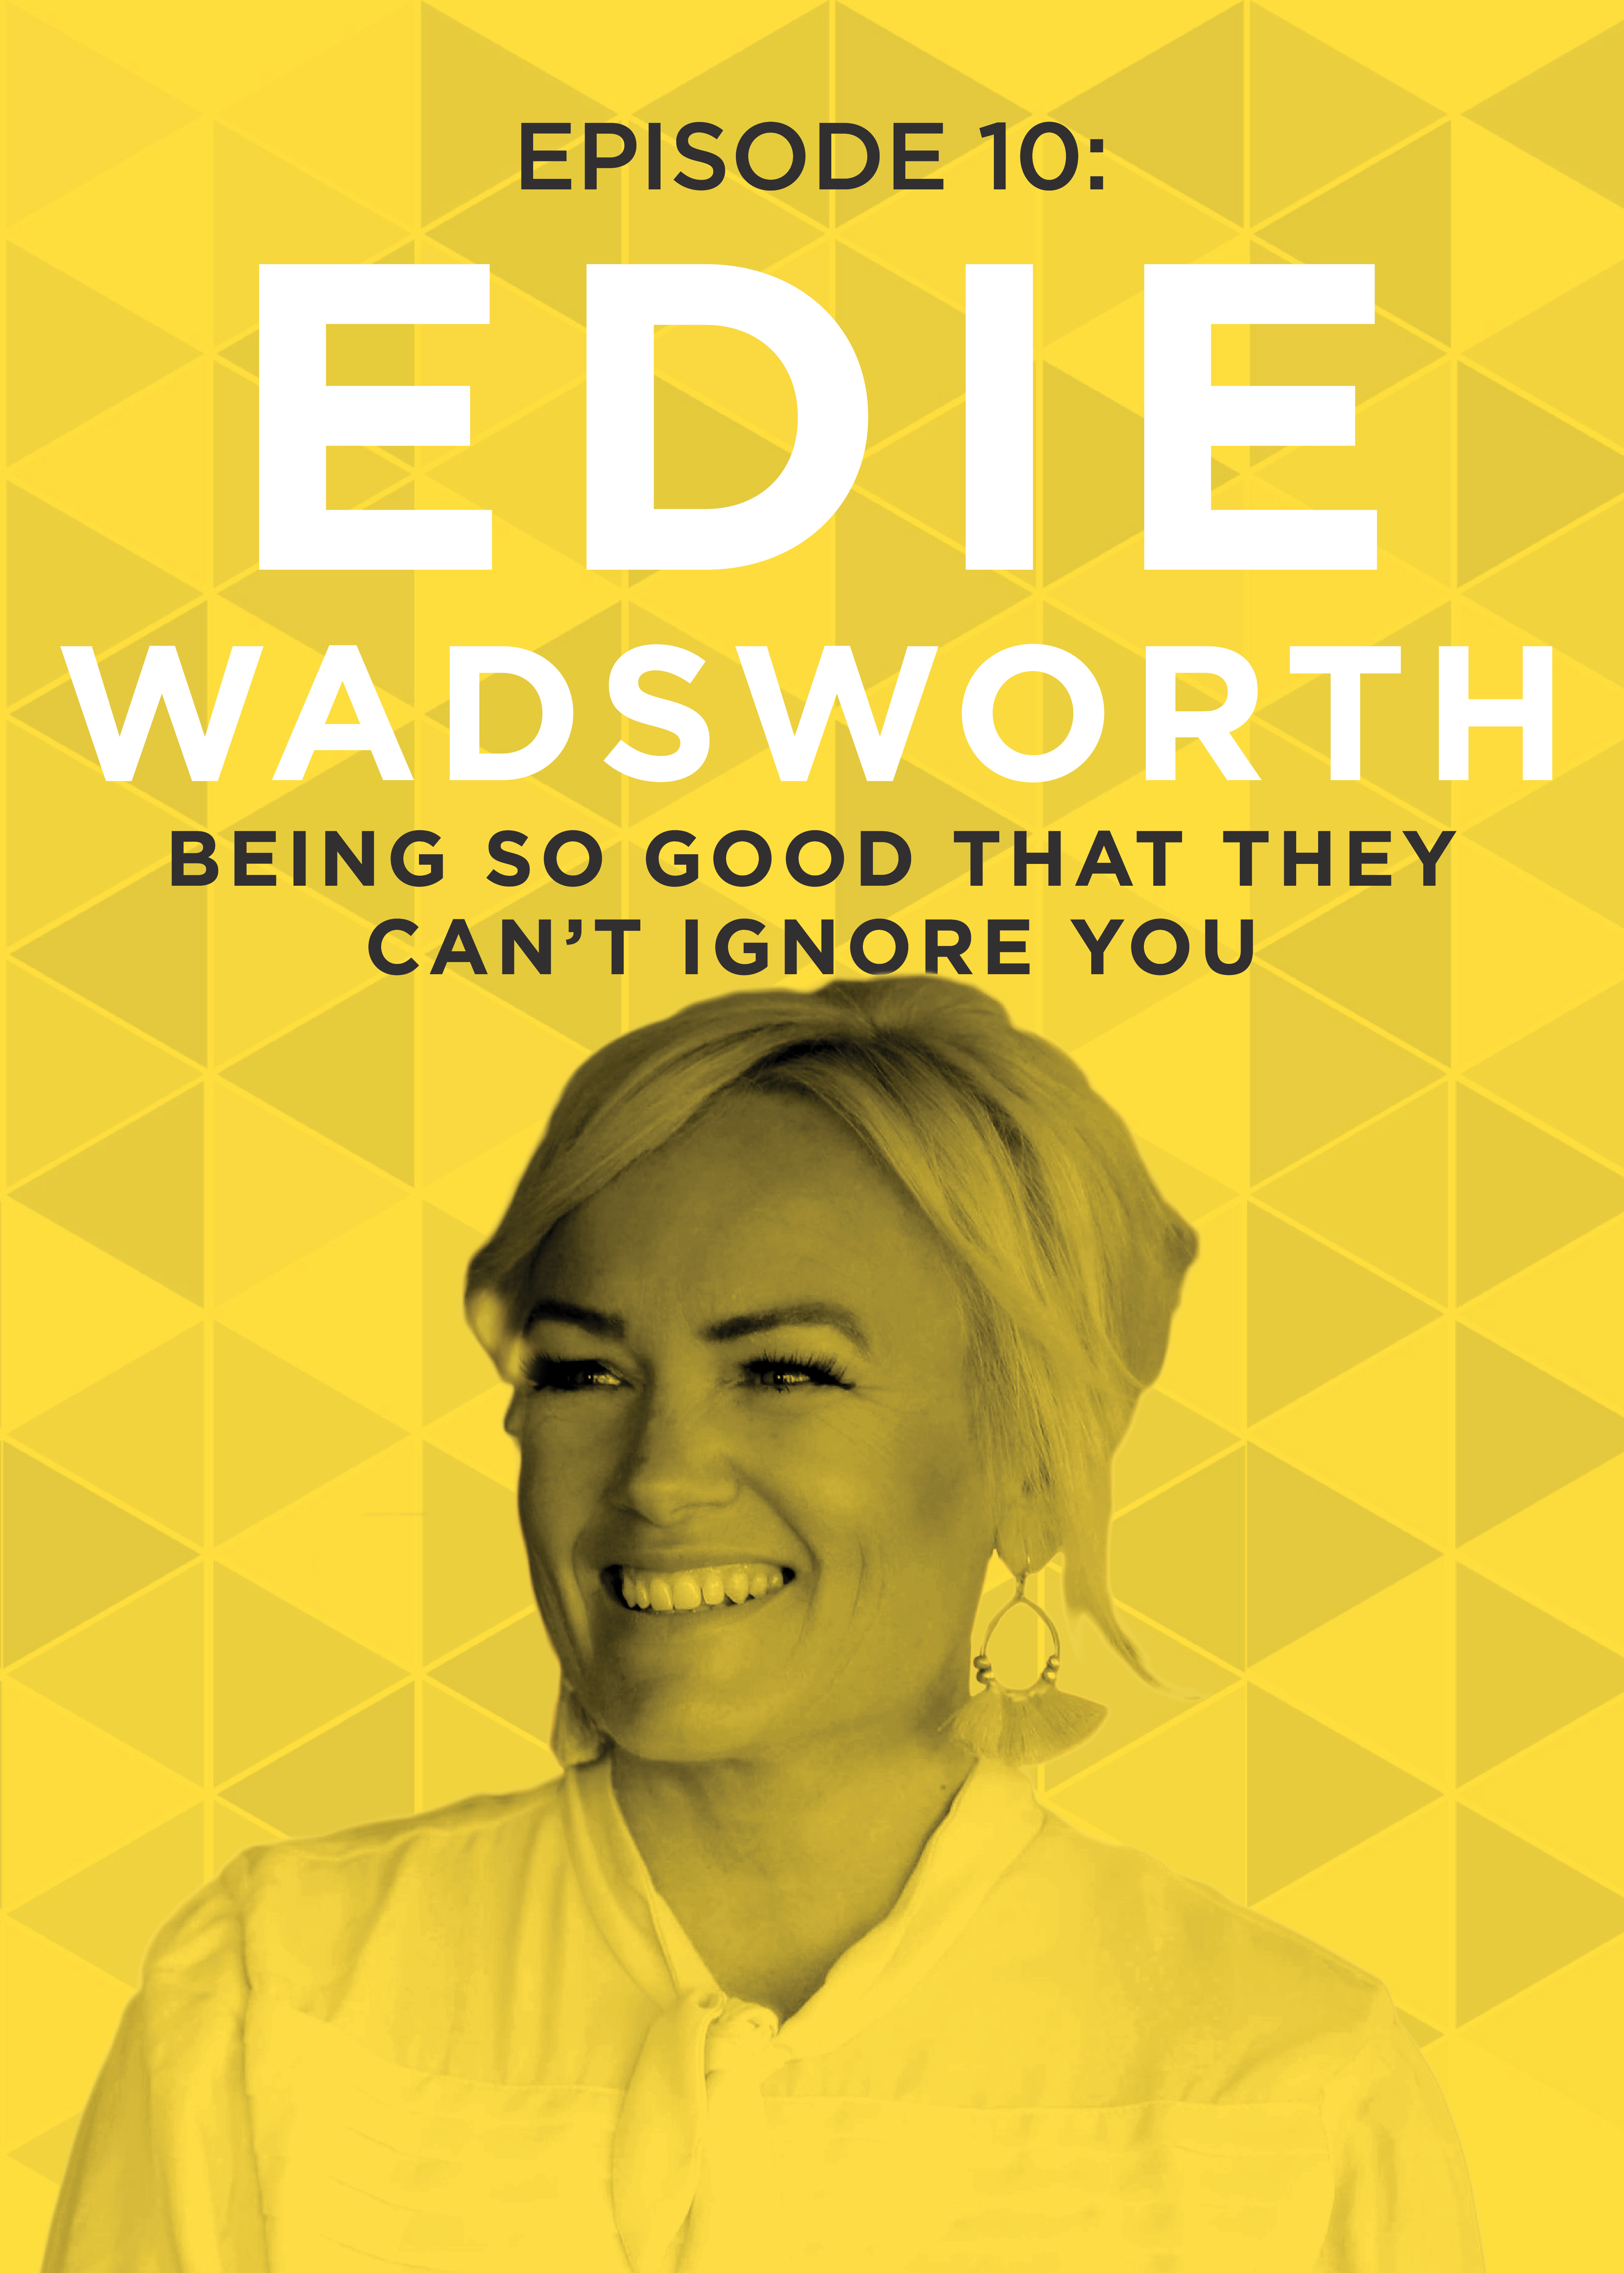 EP 10: Being So Good That They Can’t Ignore You with Edie Wadsworth